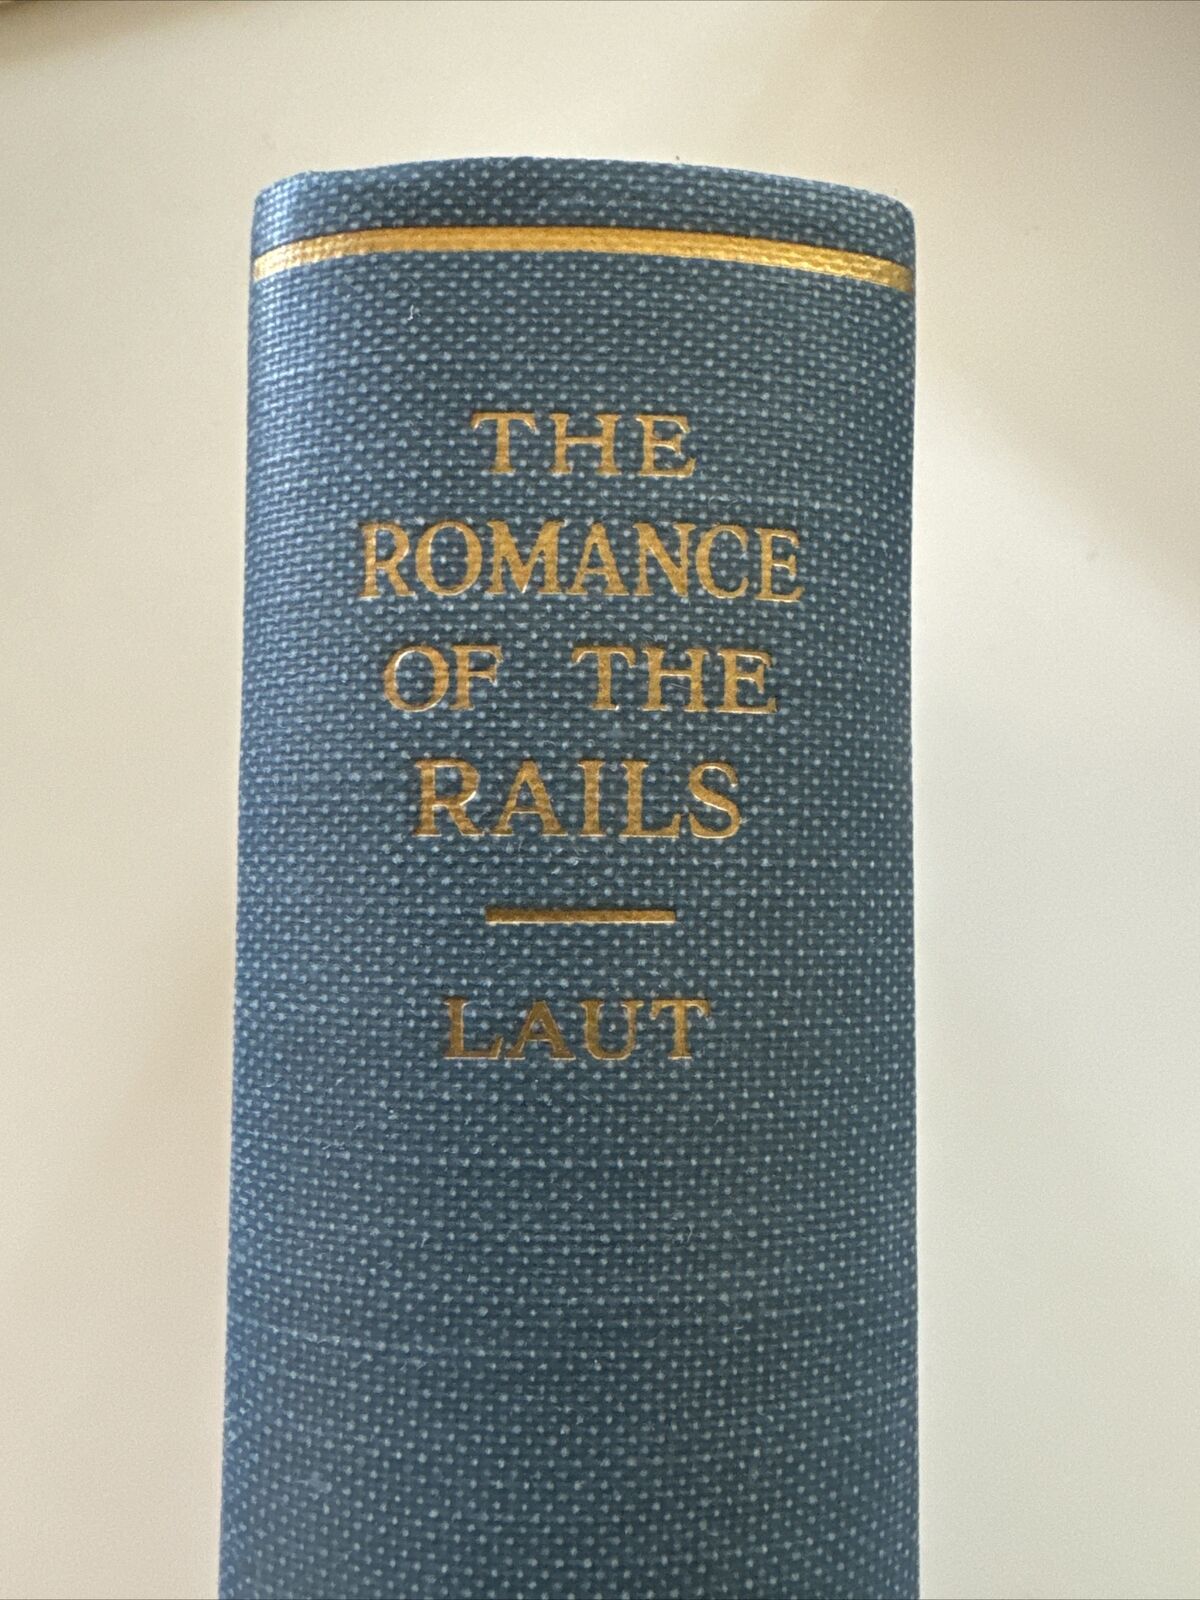 Vintage 1936 Romance Of The Rails: Story of American Railroads by A C Laut HCDJ